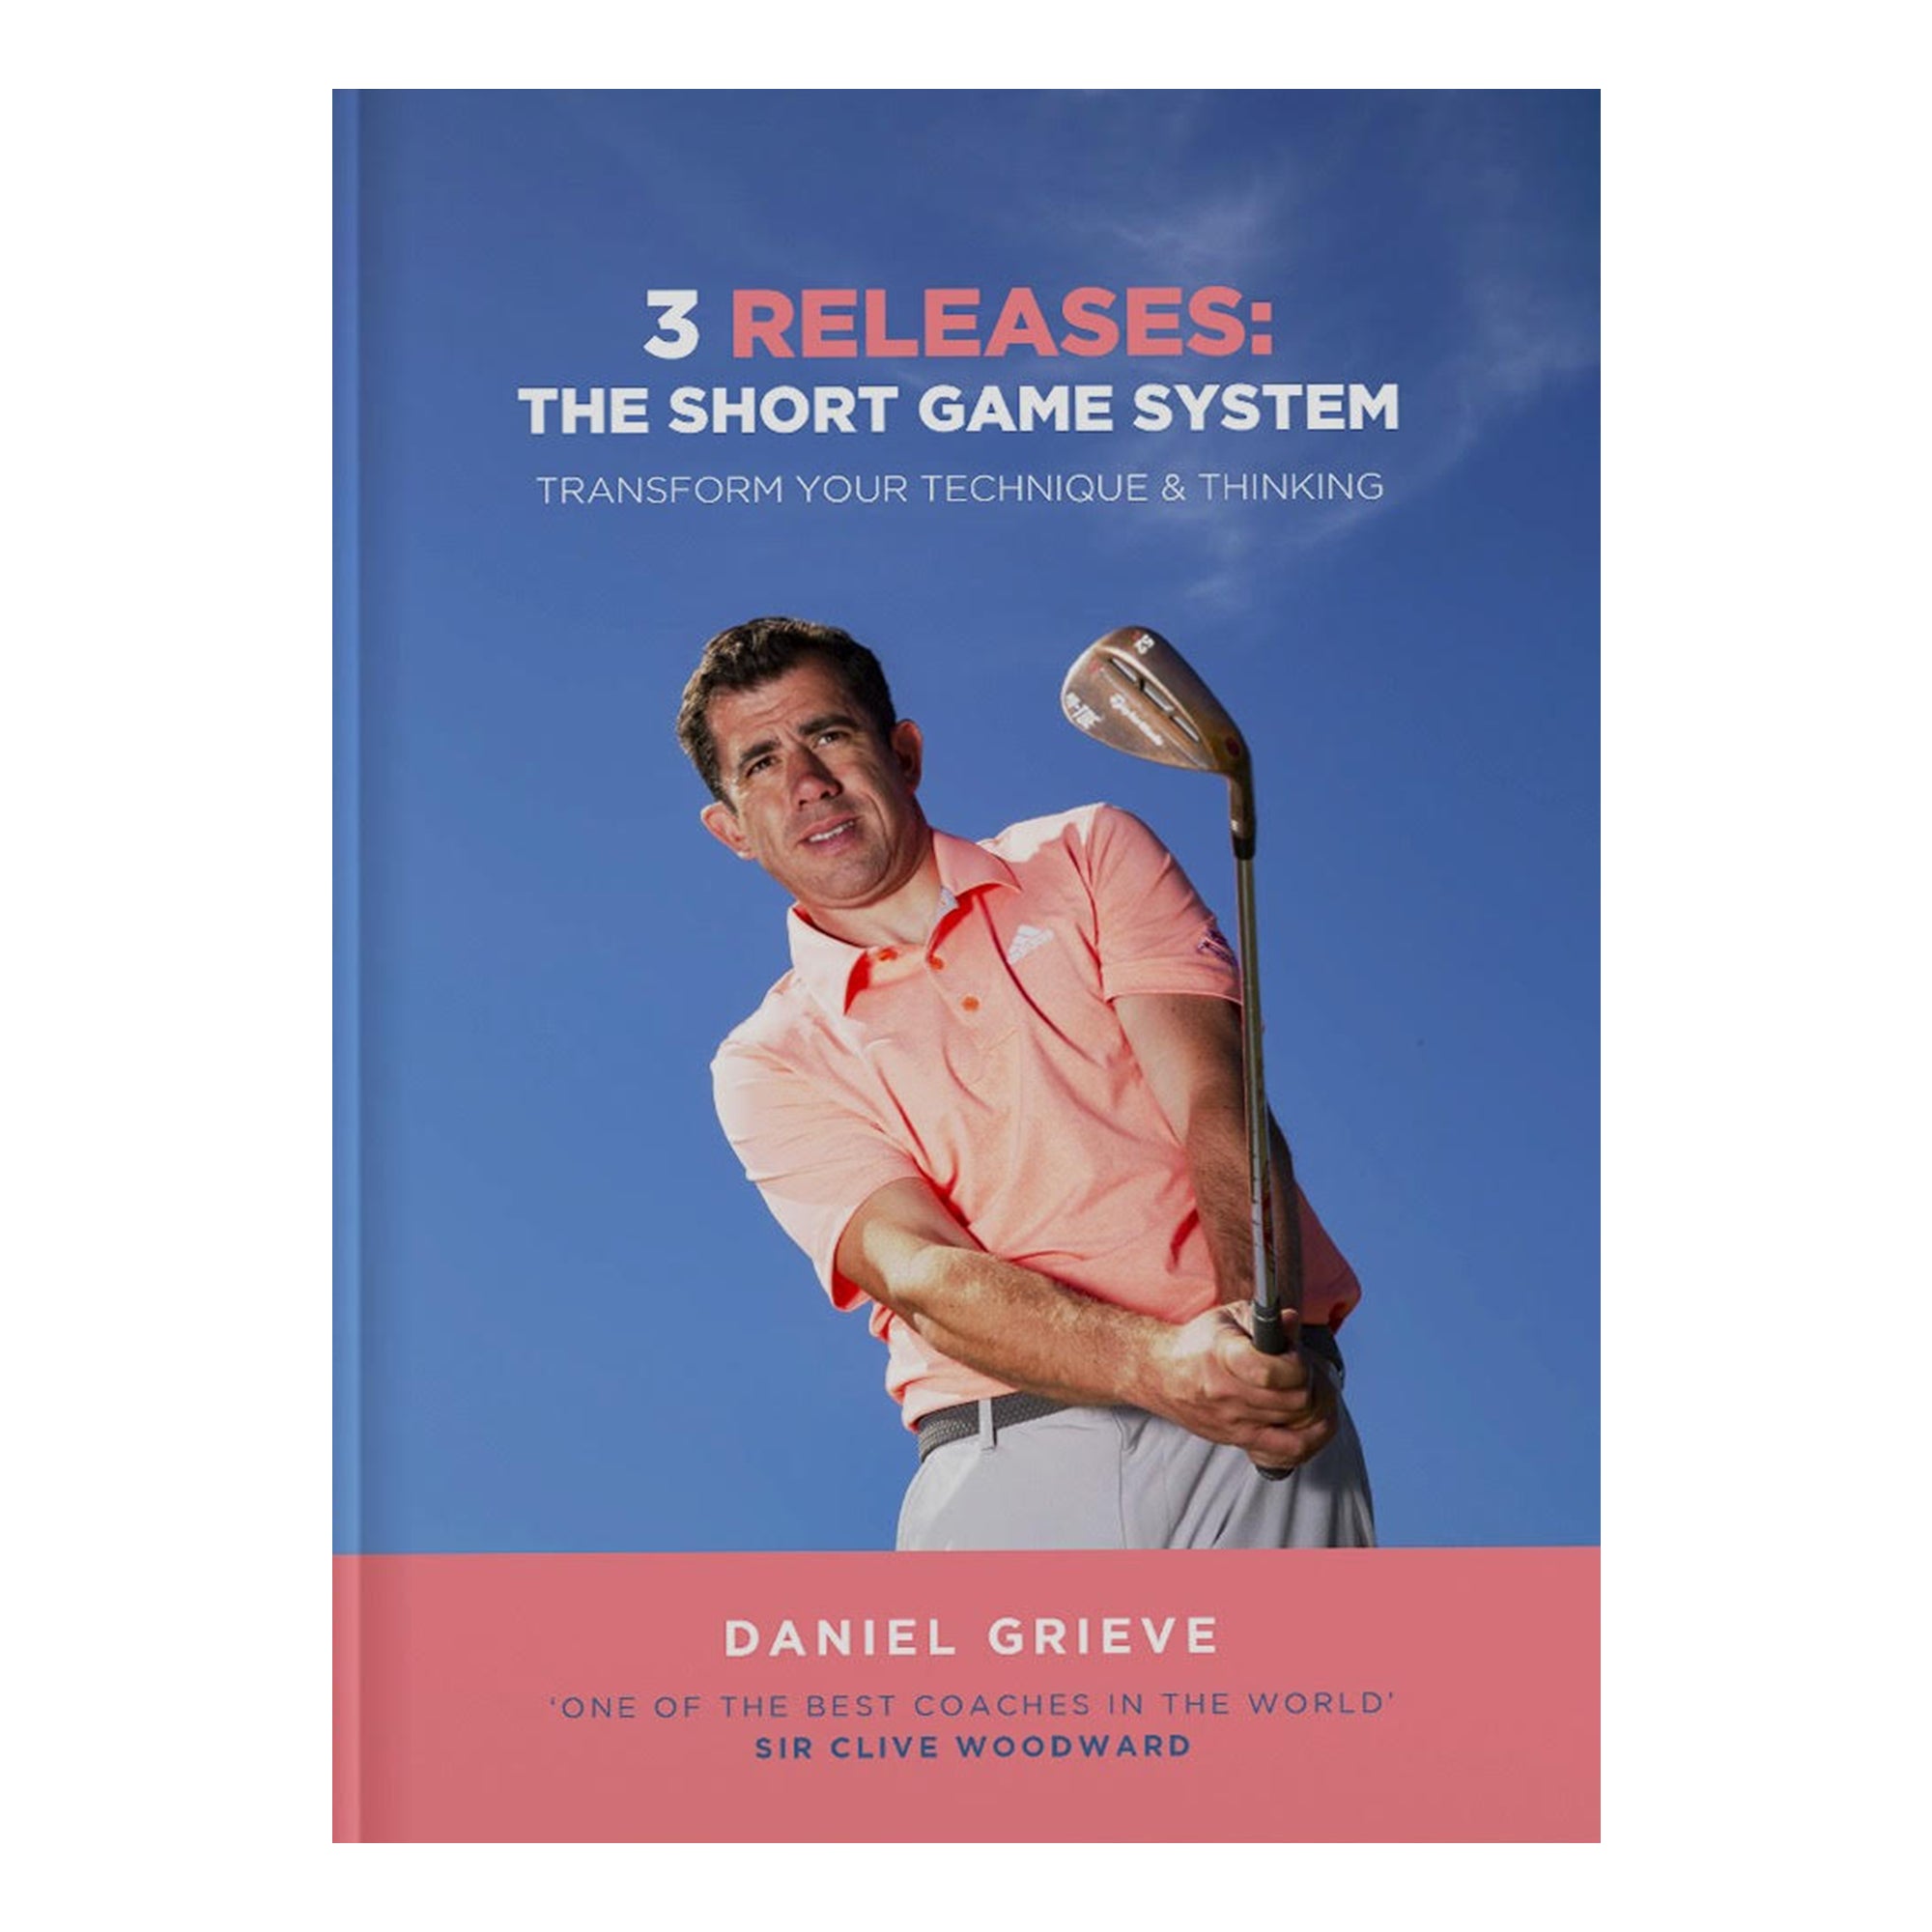 3 Releases: The Short Game System Book